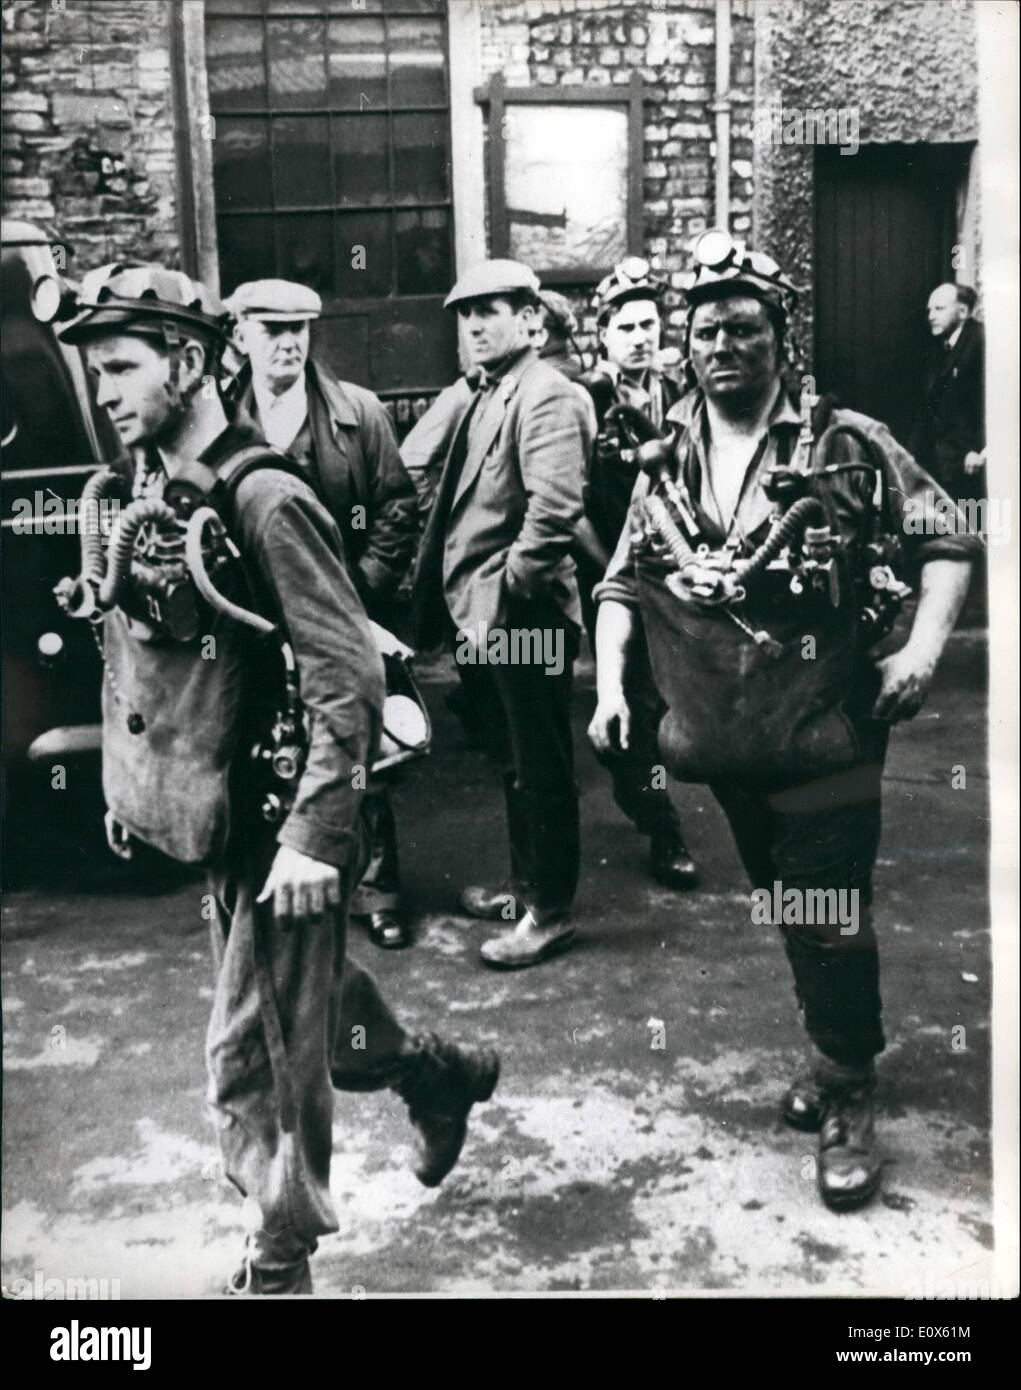 May 05, 1965 - 31 miners die in pit disaster. 31 miners died in an explosion yesterday at the Cambrian Colliery, near Tonypandy, in the Rhonda valley. photo shows Grim - faced rescue workers pictured before entering the disaster pit. Stock Photo